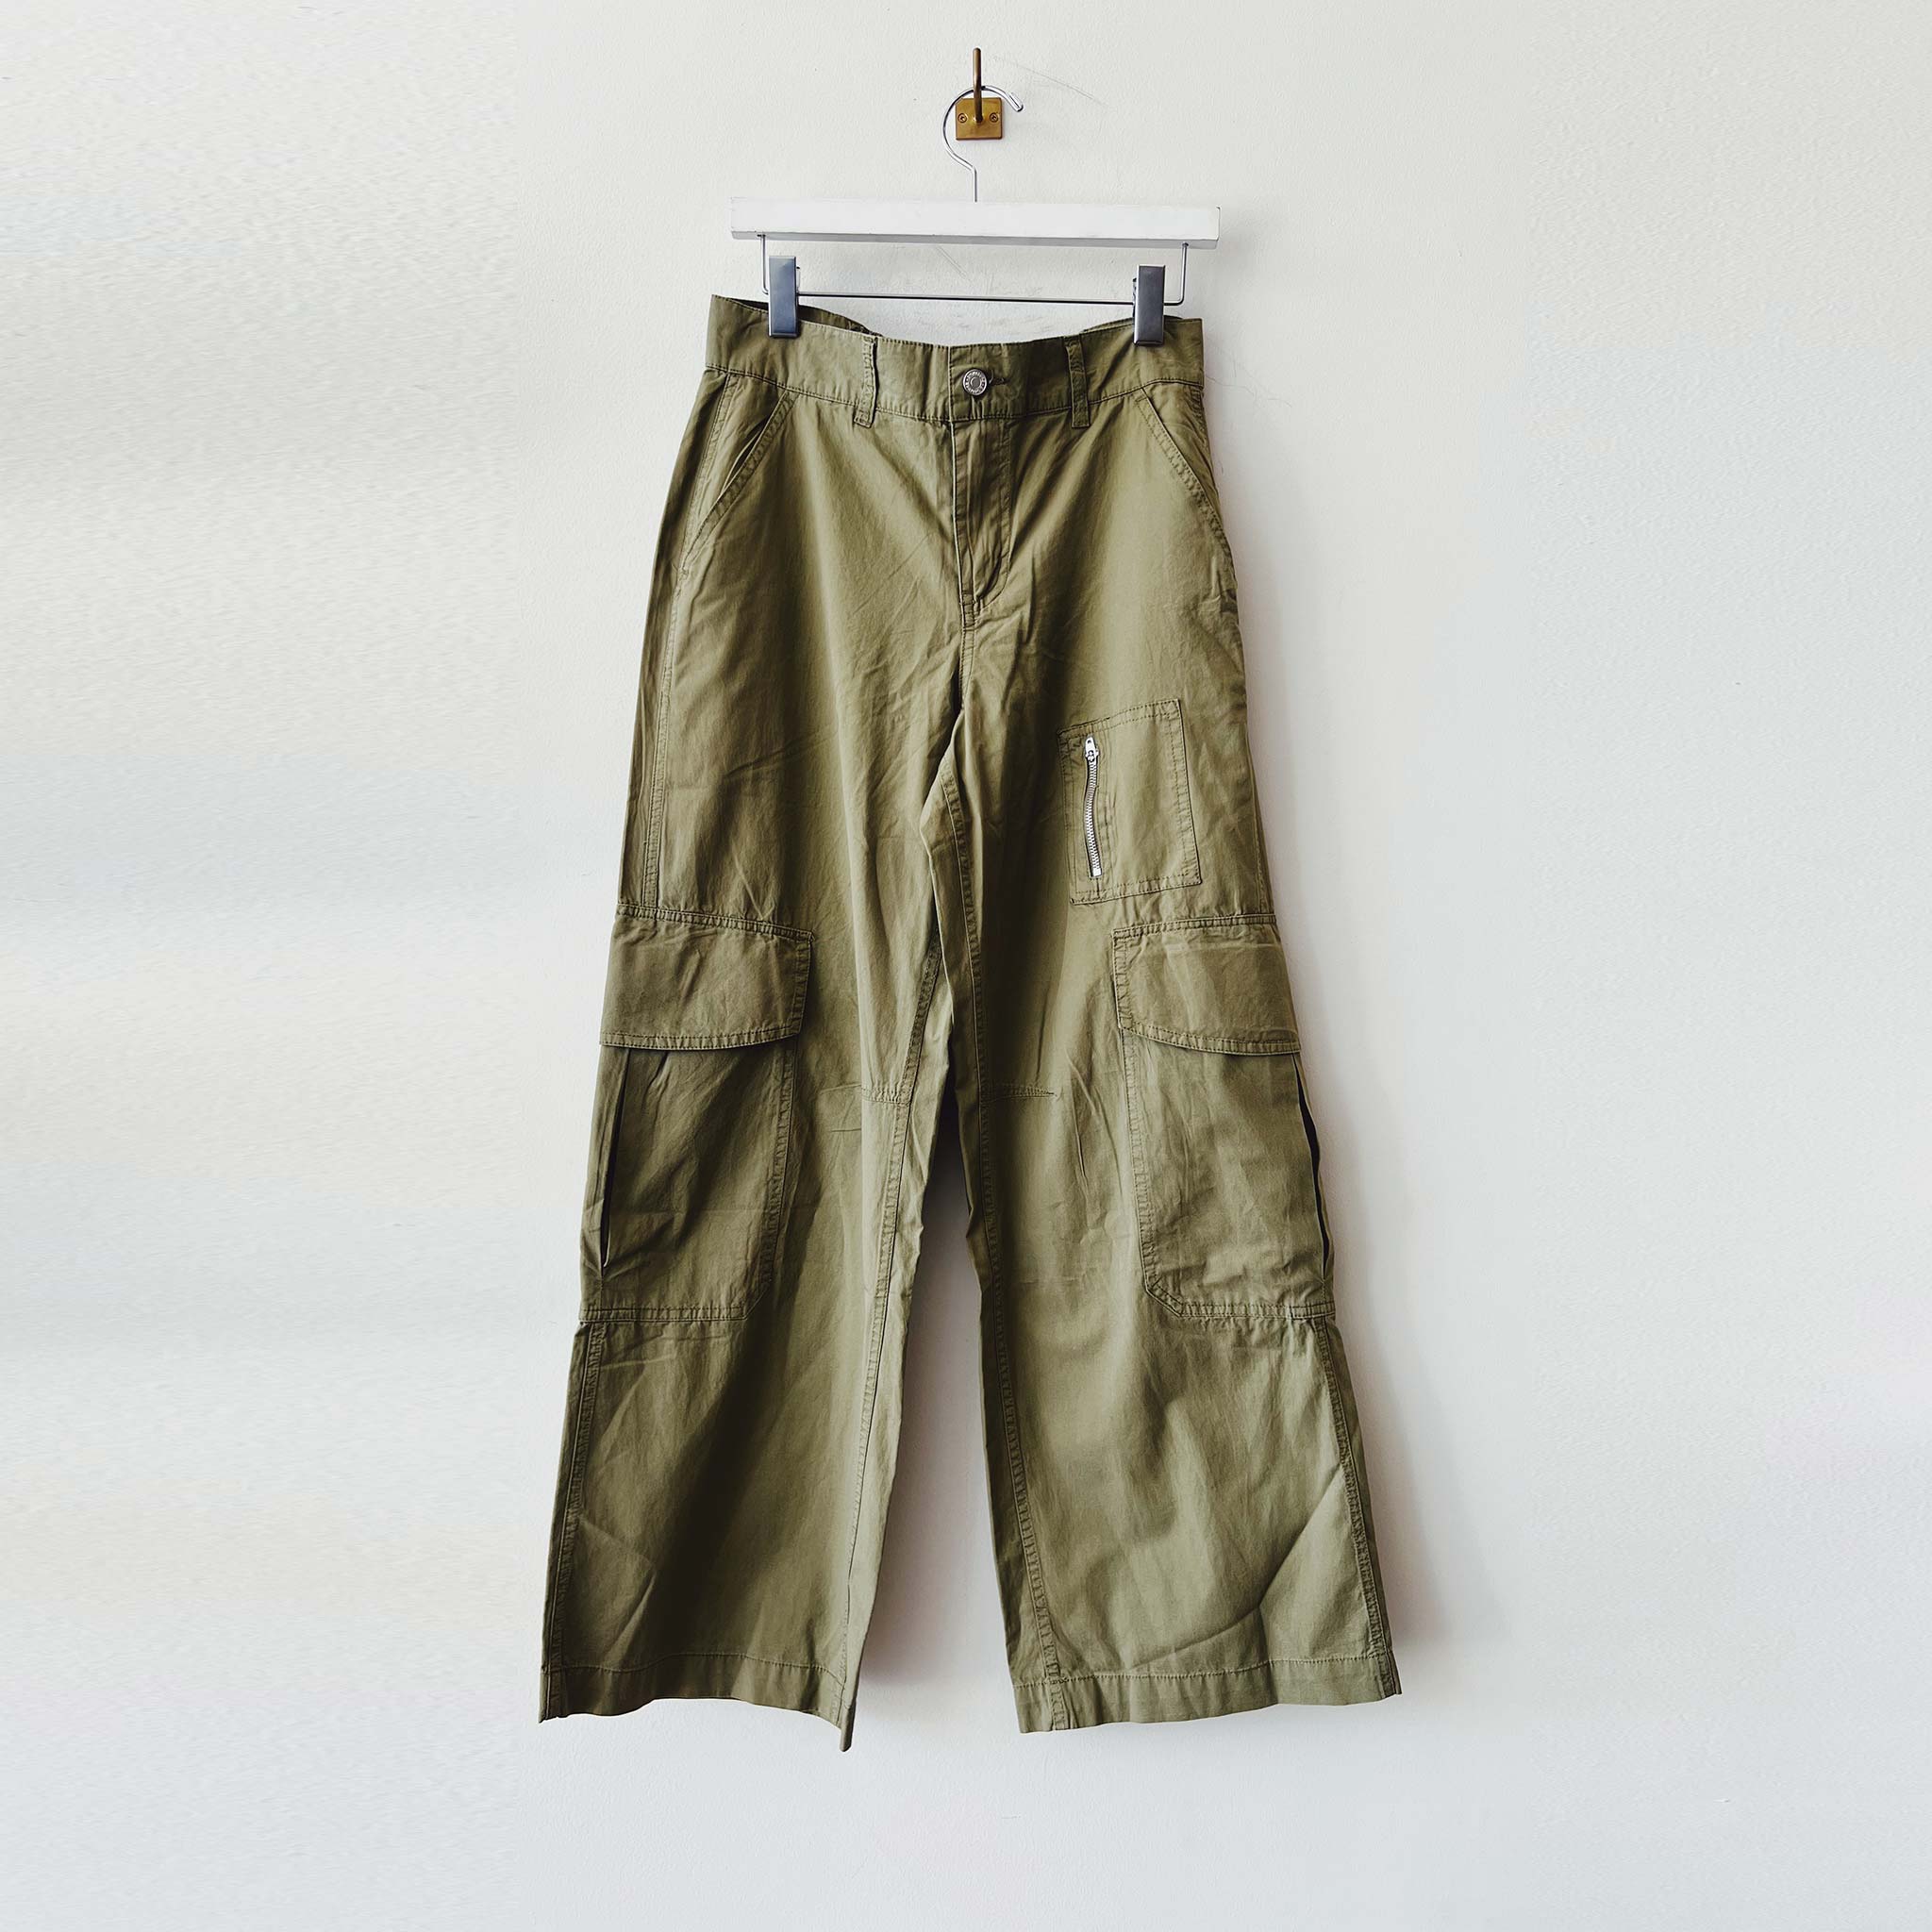 Flat detail photo of the Wide Leg Cargo Pant - Martini Olive.